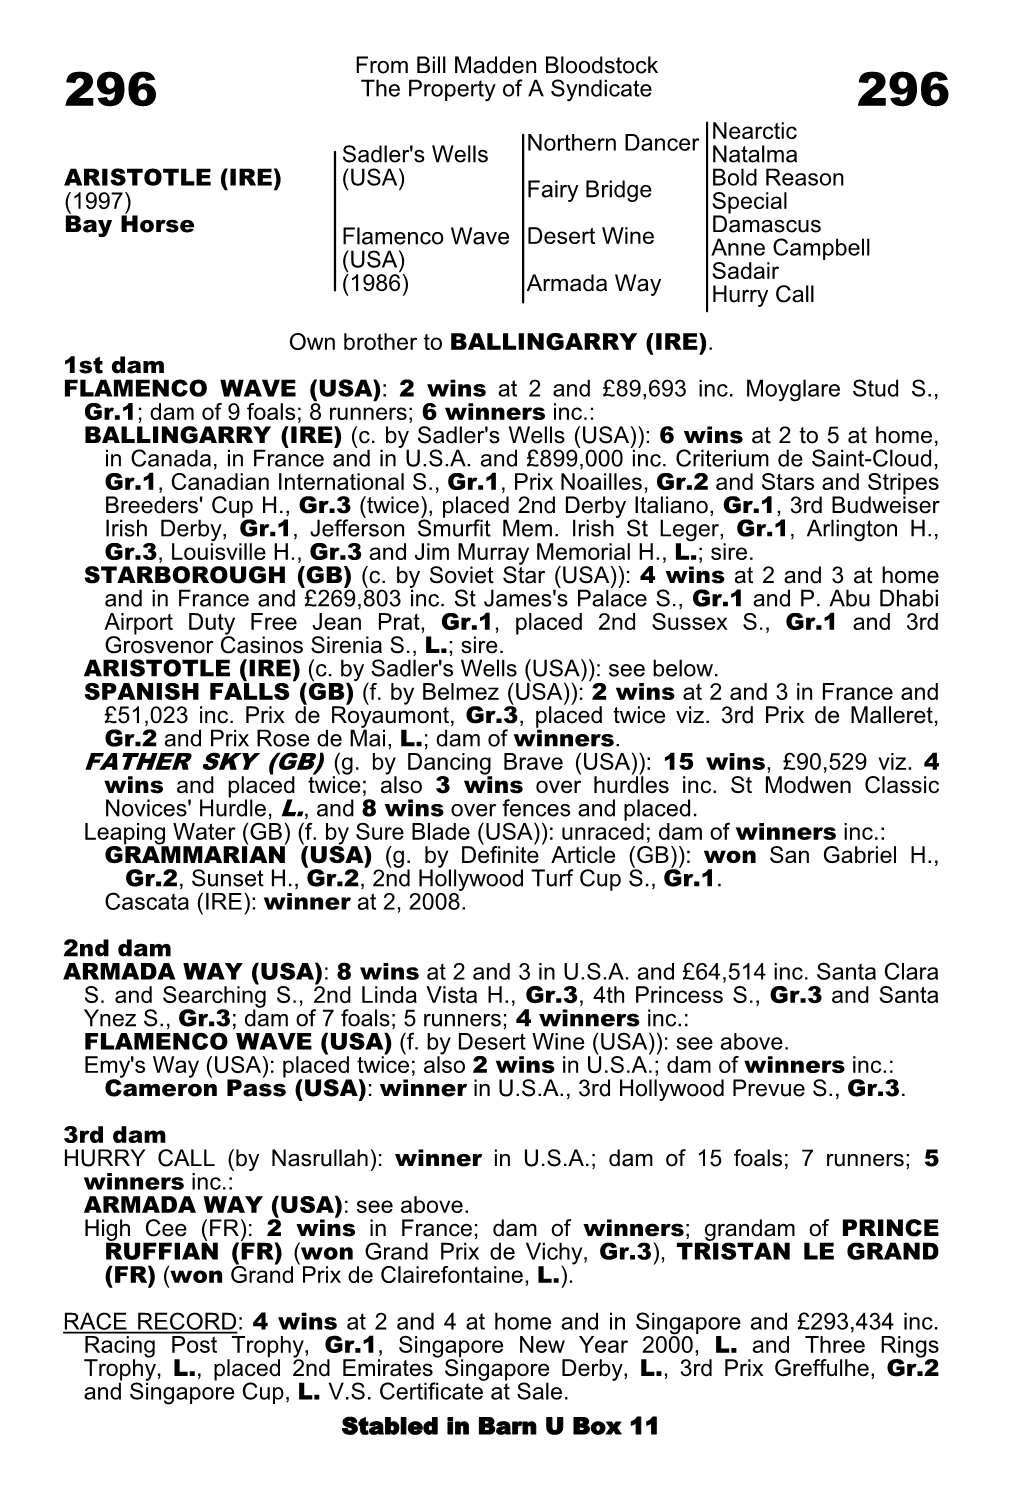 From Bill Madden Bloodstock the Property of a Syndicate